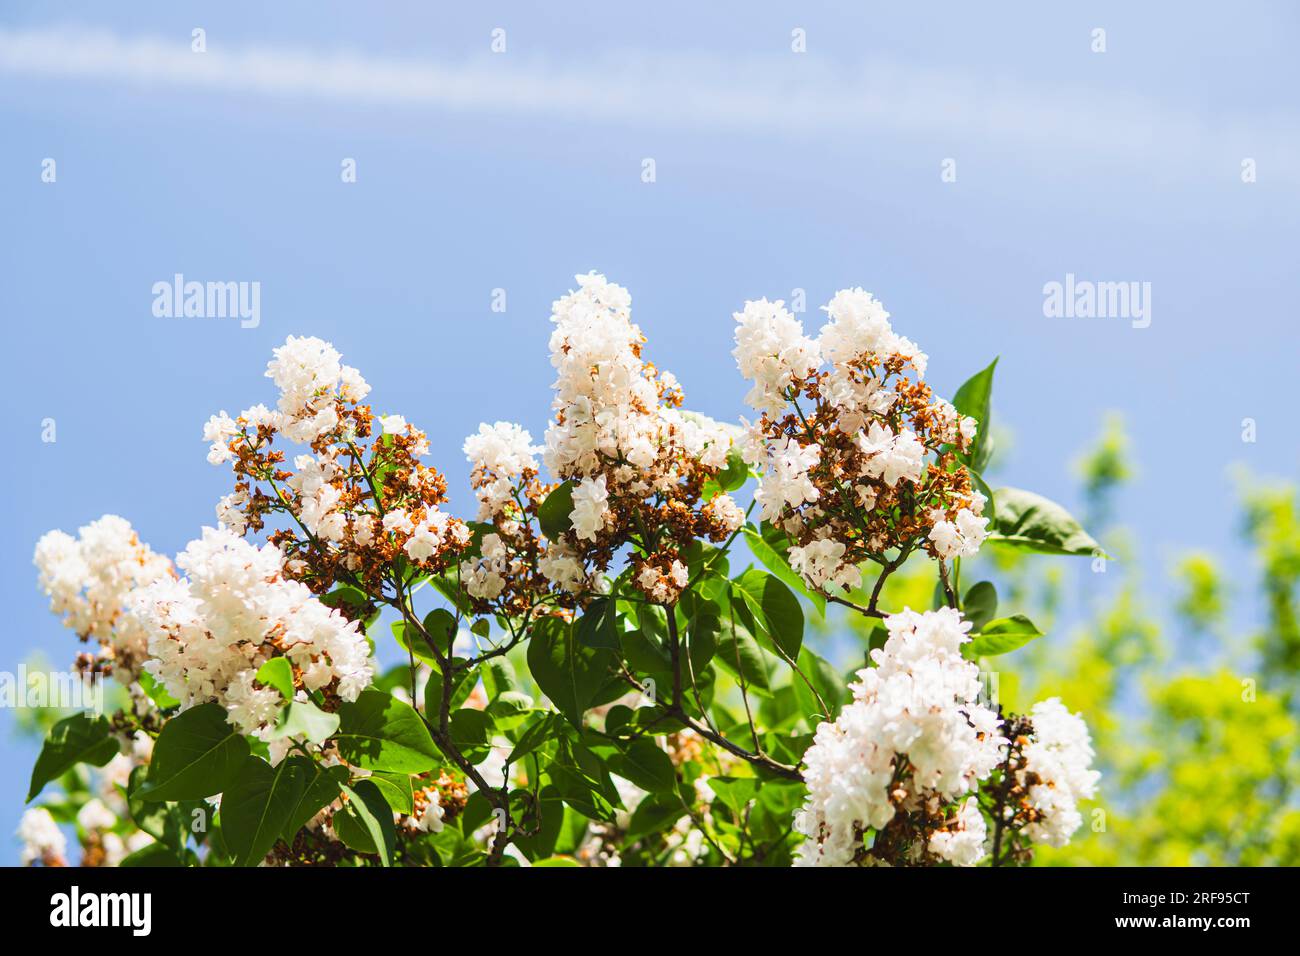 Detail of lilac with white flowers over blue sky Stock Photo